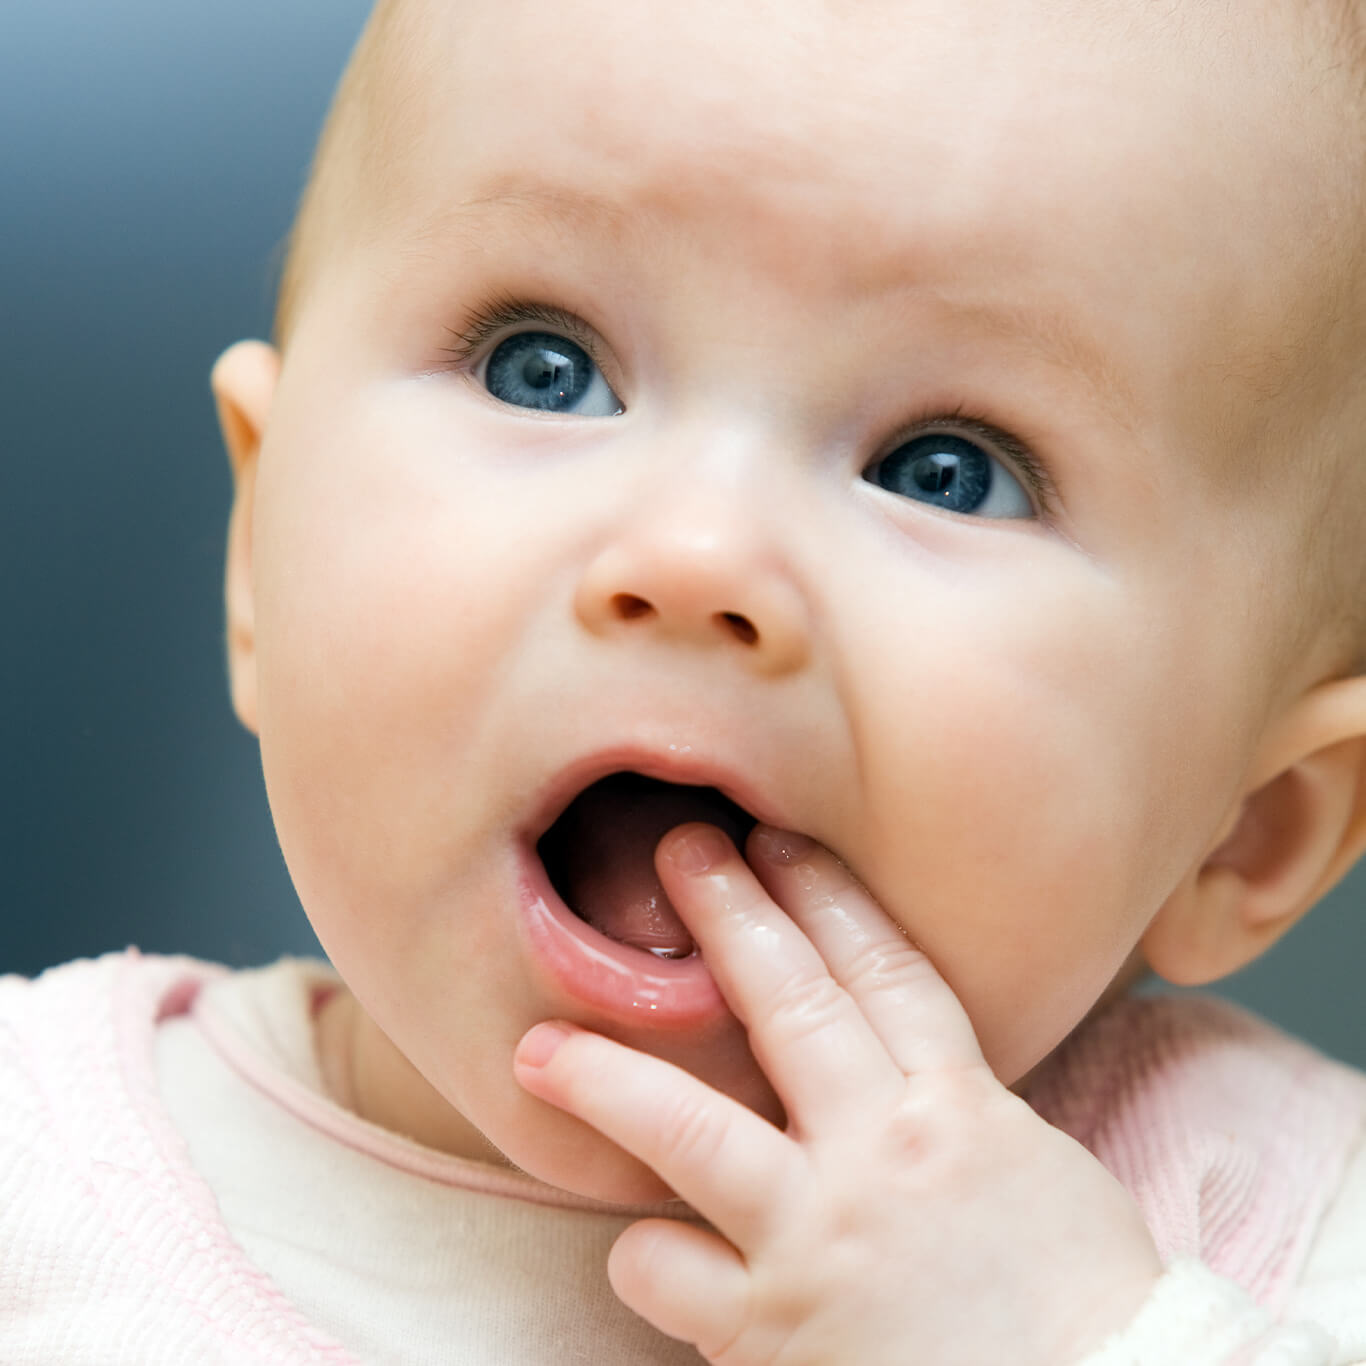 Teething Symptoms - Stages of Teething – How to Soothe a Teething Baby